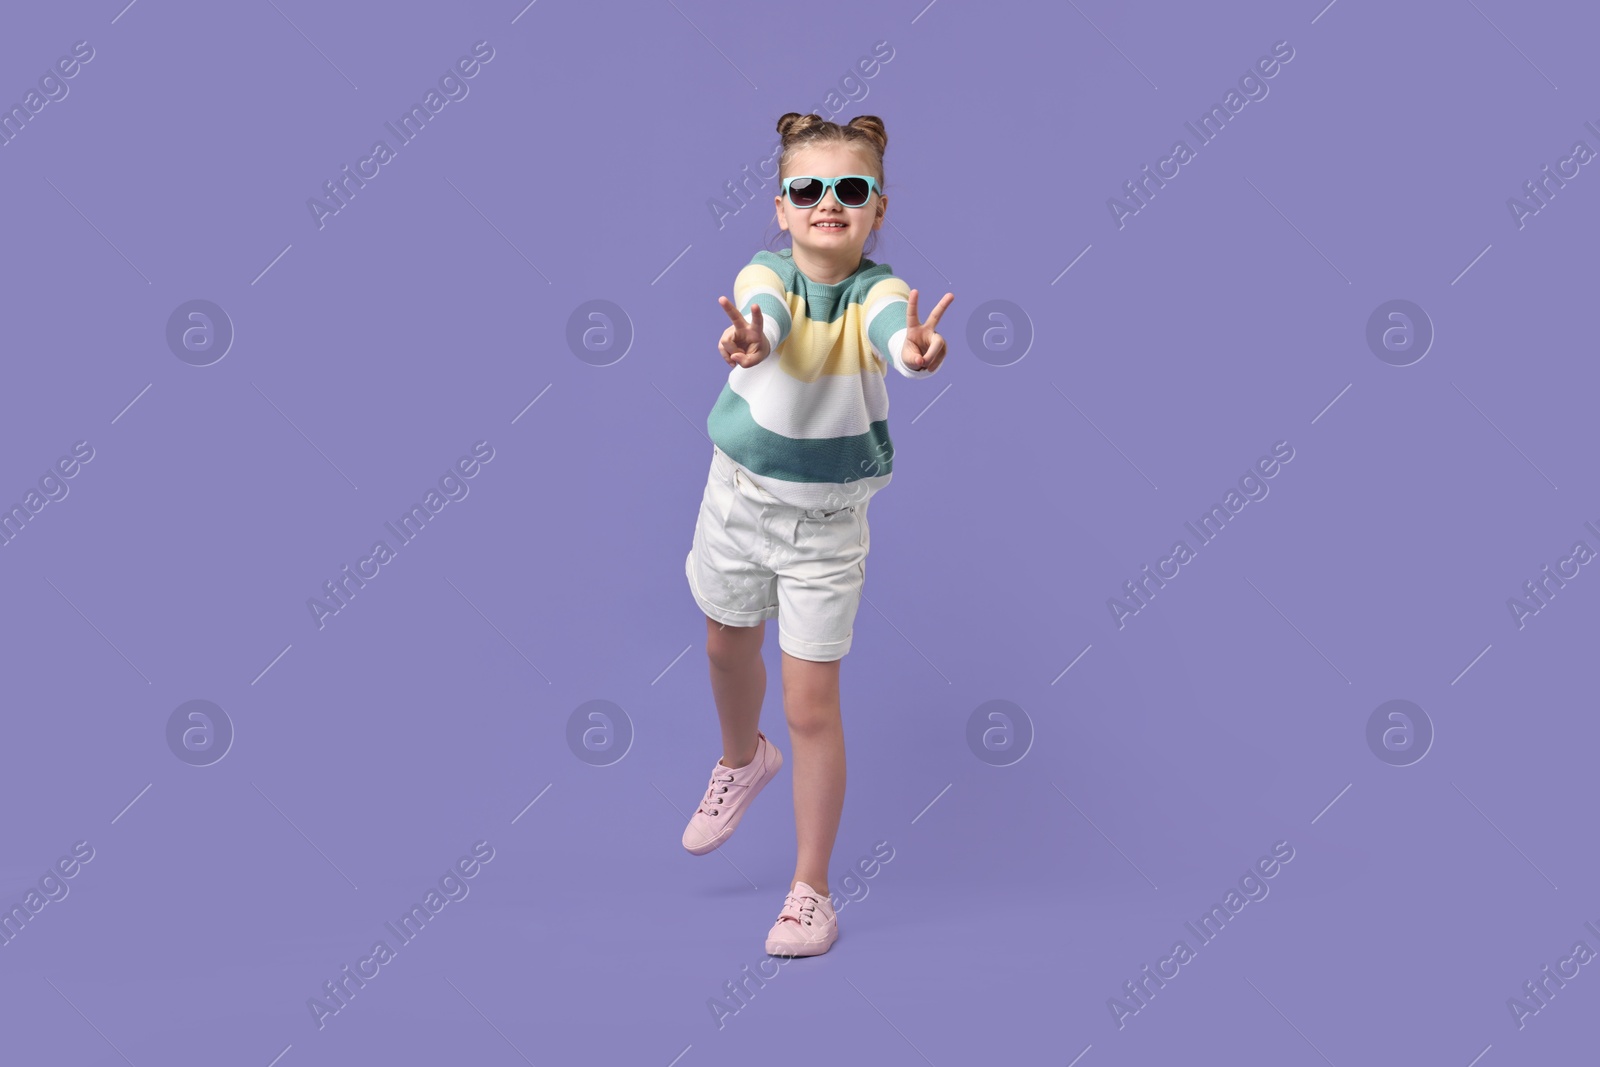 Photo of Cute little girl in sunglasses showing V-sign while dancing on violet background